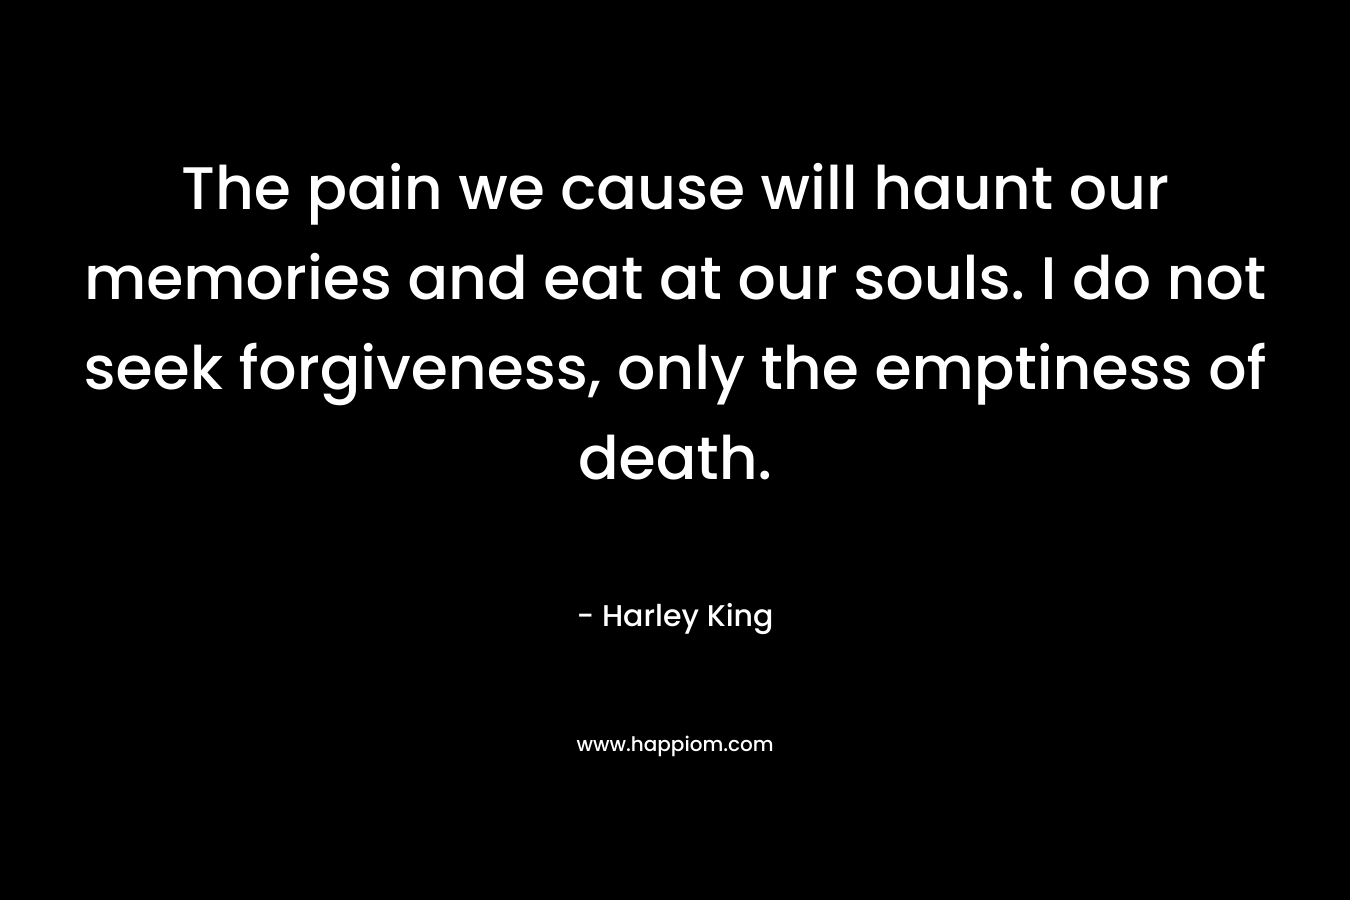 The pain we cause will haunt our memories and eat at our souls. I do not seek forgiveness, only the emptiness of death. – Harley King